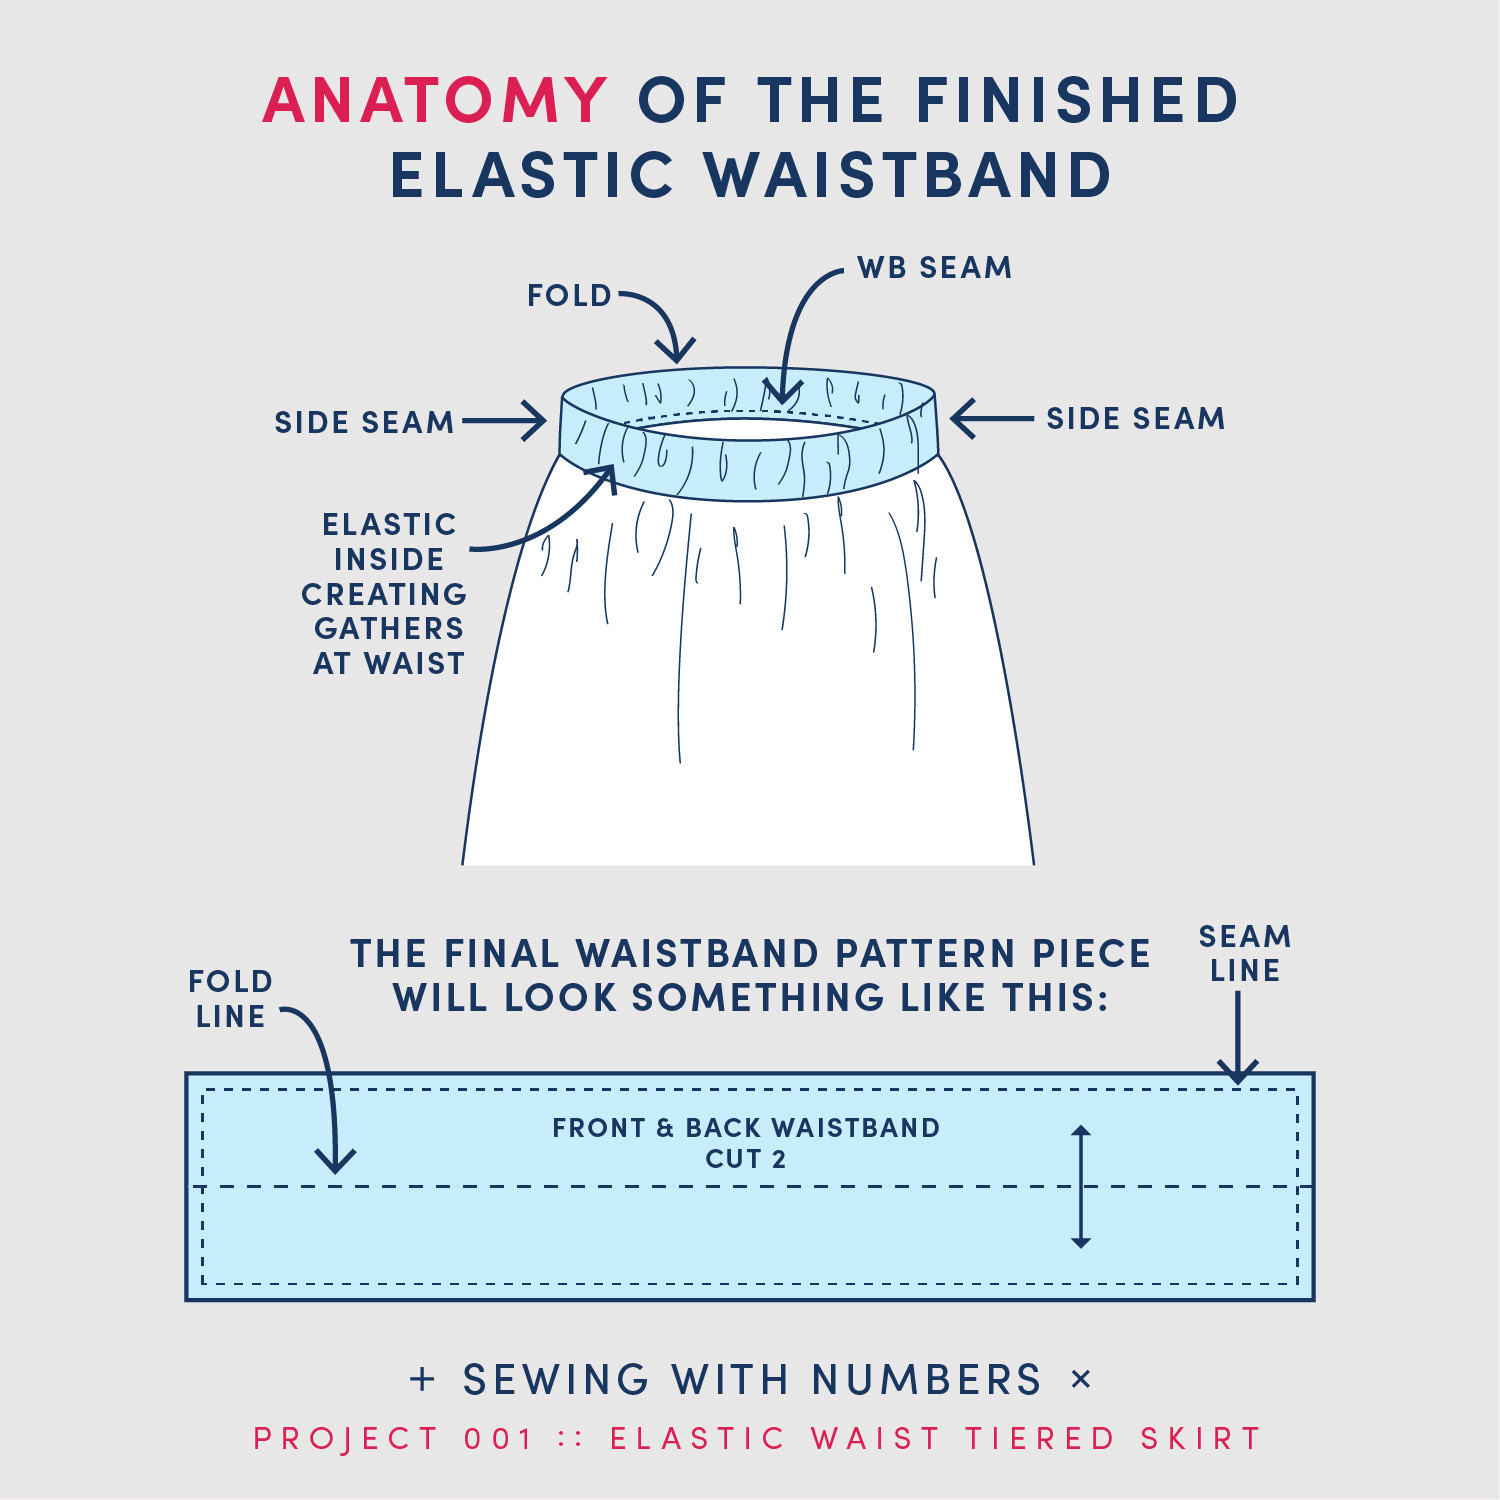 Project 001: How to draft an elastic waistband